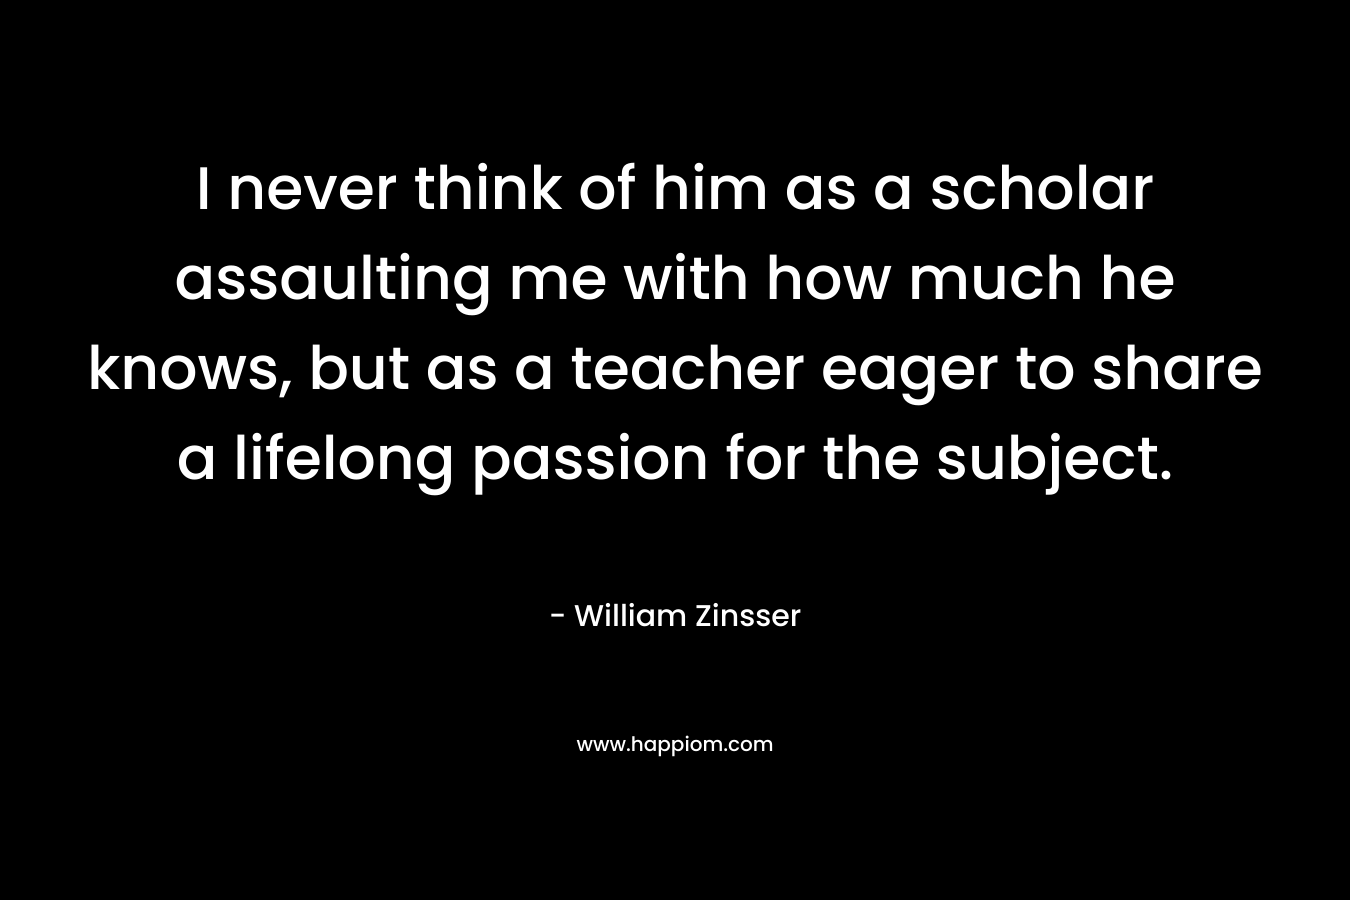 I never think of him as a scholar assaulting me with how much he knows, but as a teacher eager to share a lifelong passion for the subject. – William Zinsser